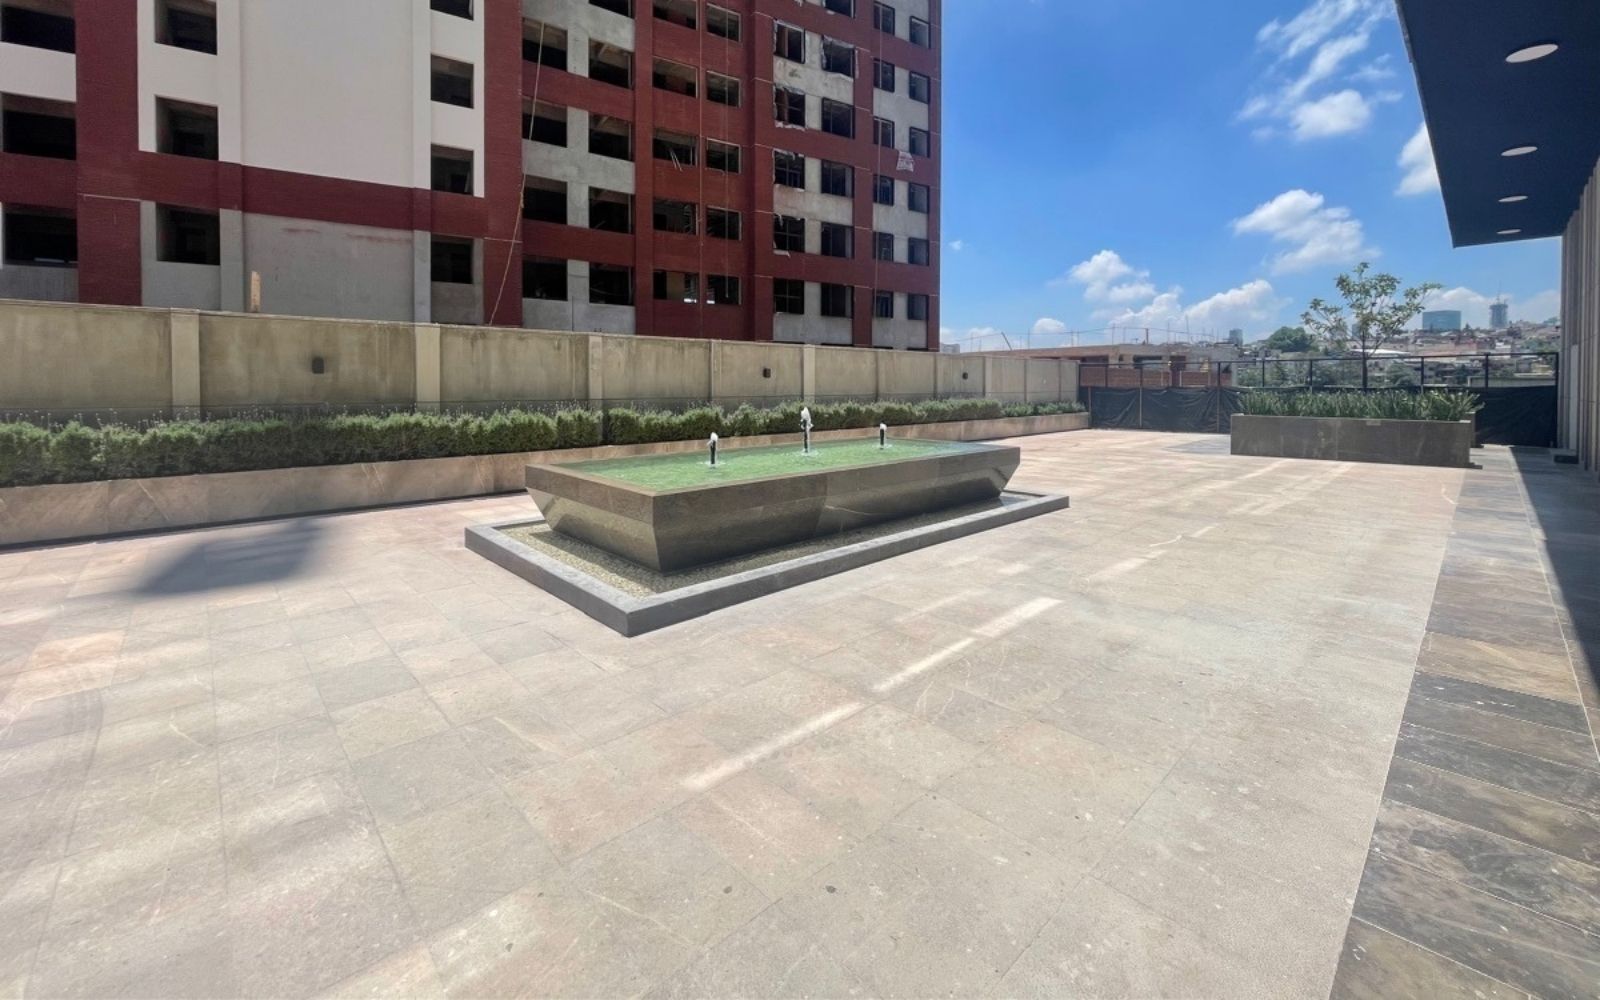 Condominium with private forest, water well, climbing wall, spa, dog park, playground, spa, spinning gym and more for sale Naucalpan